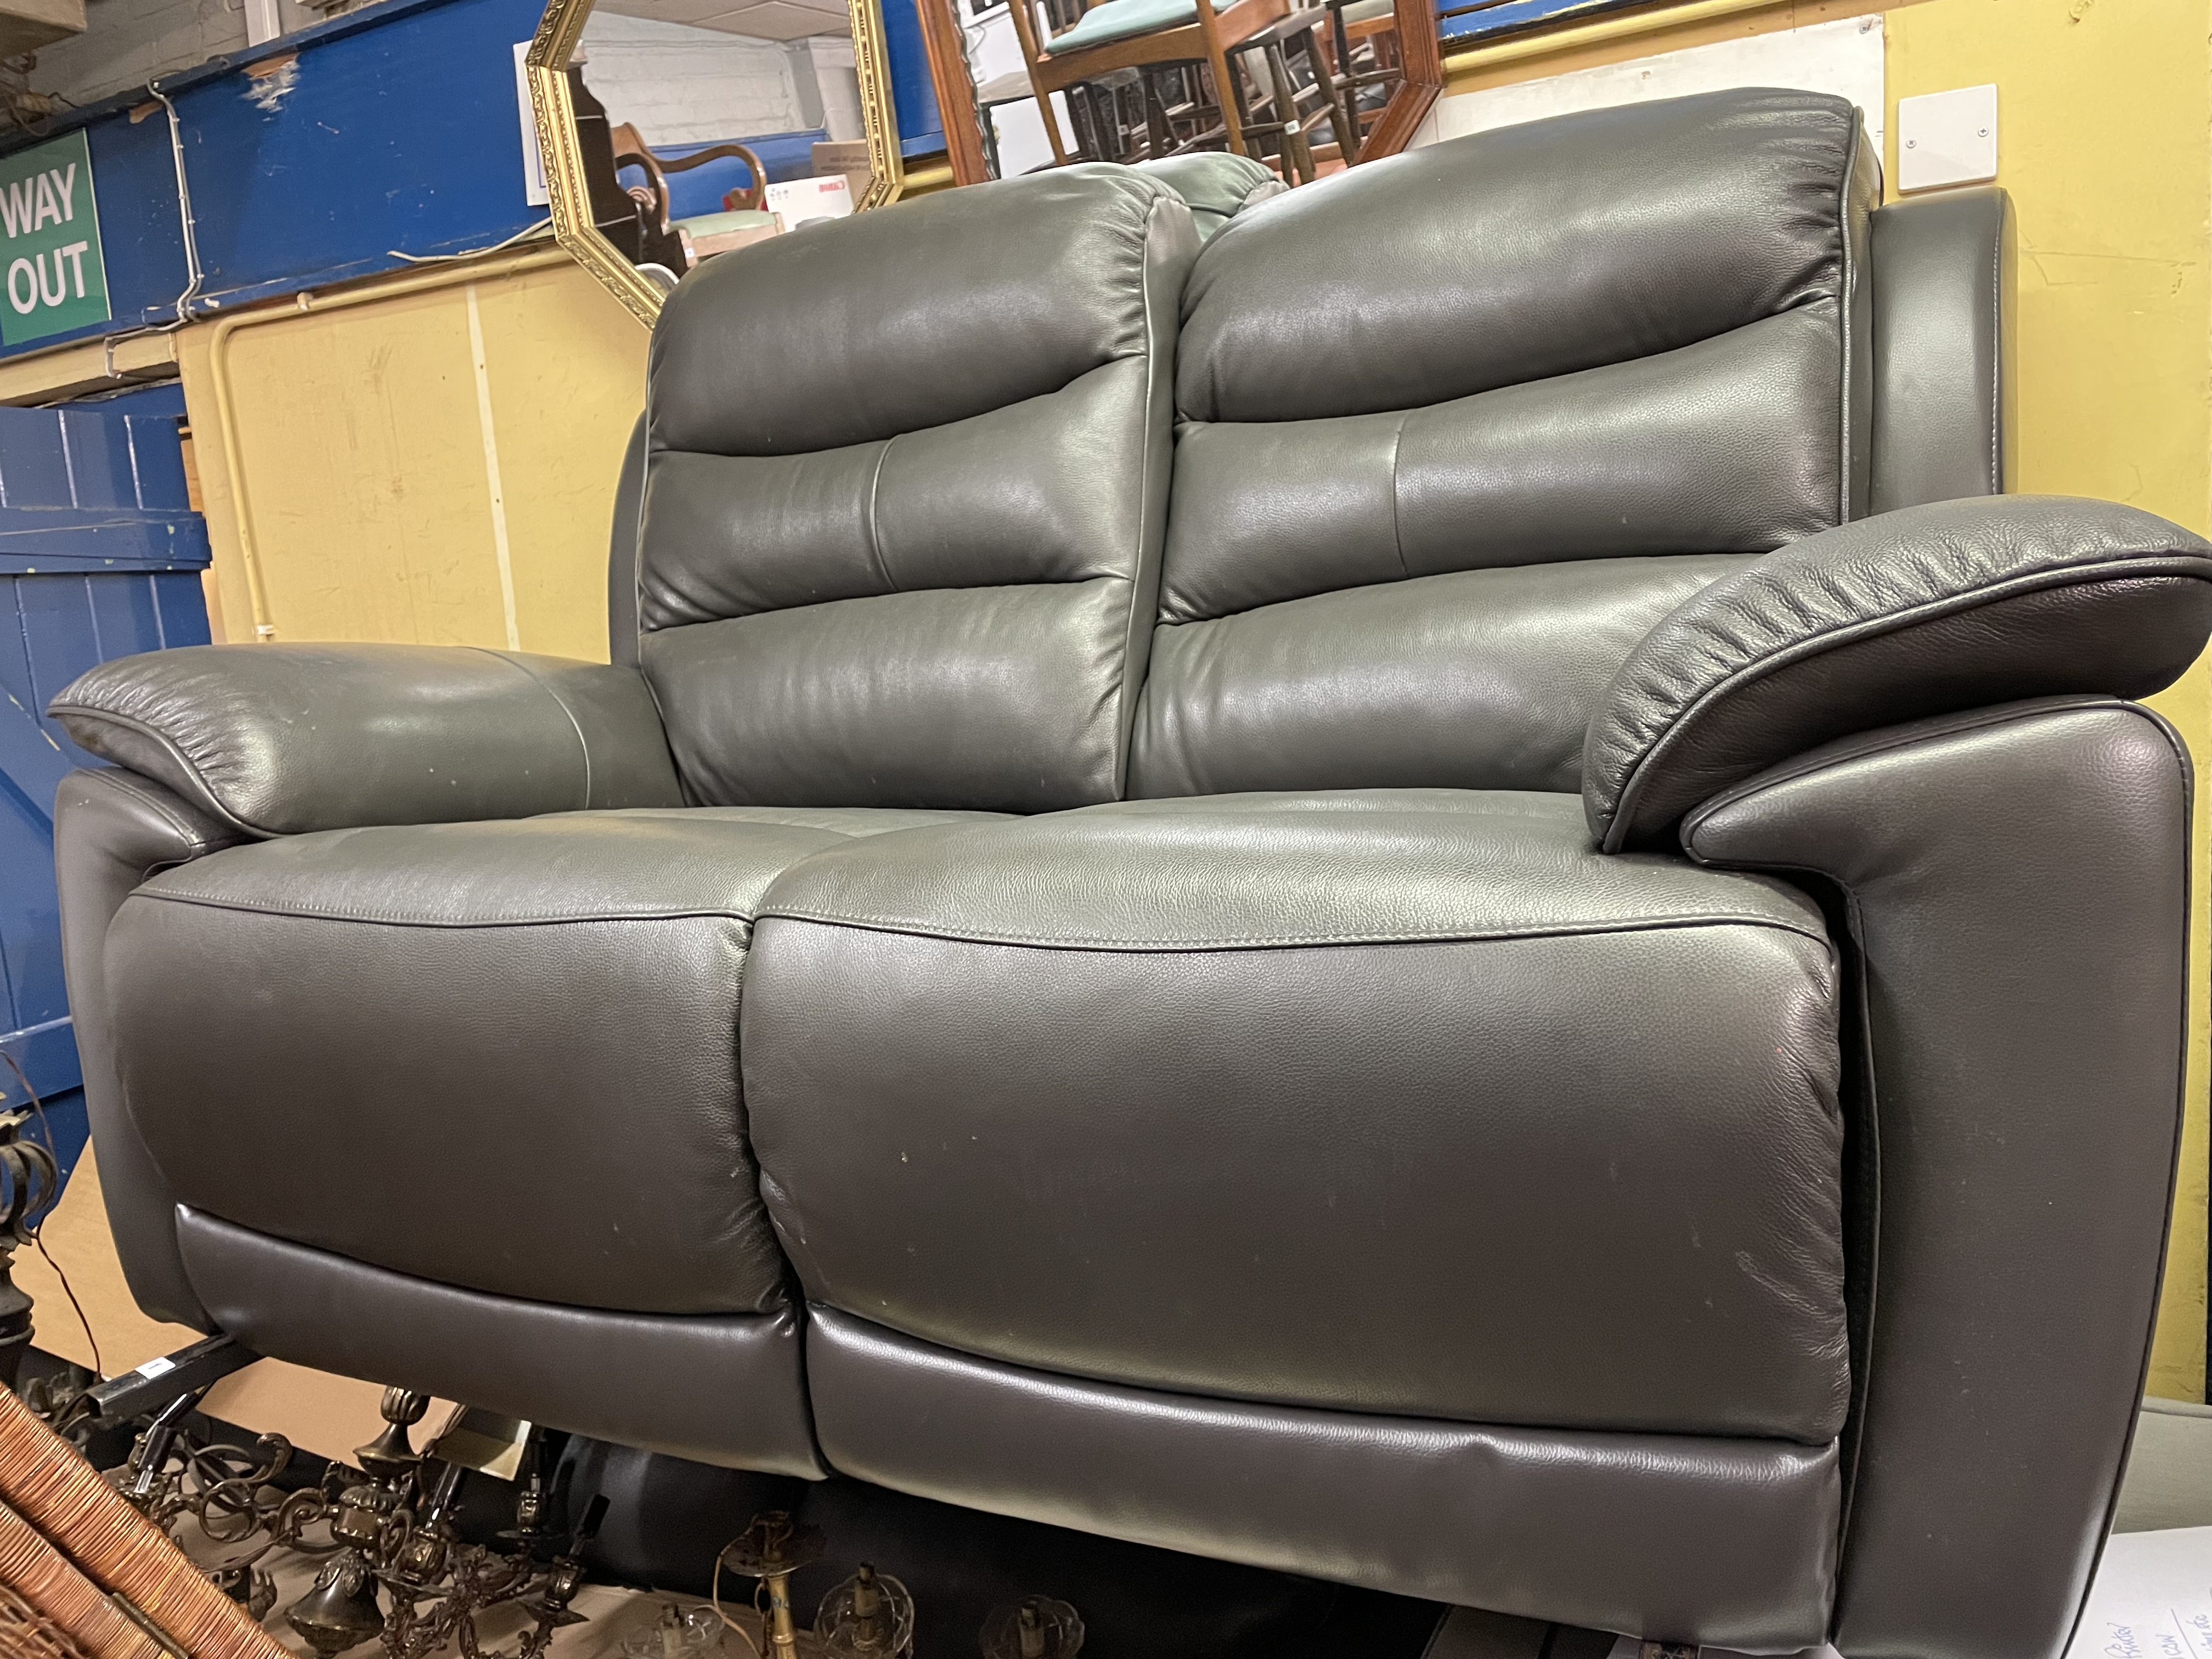 AS NEW SLATE GREY LEATHER RECLINING TWO SEATER SOFA - Image 2 of 2